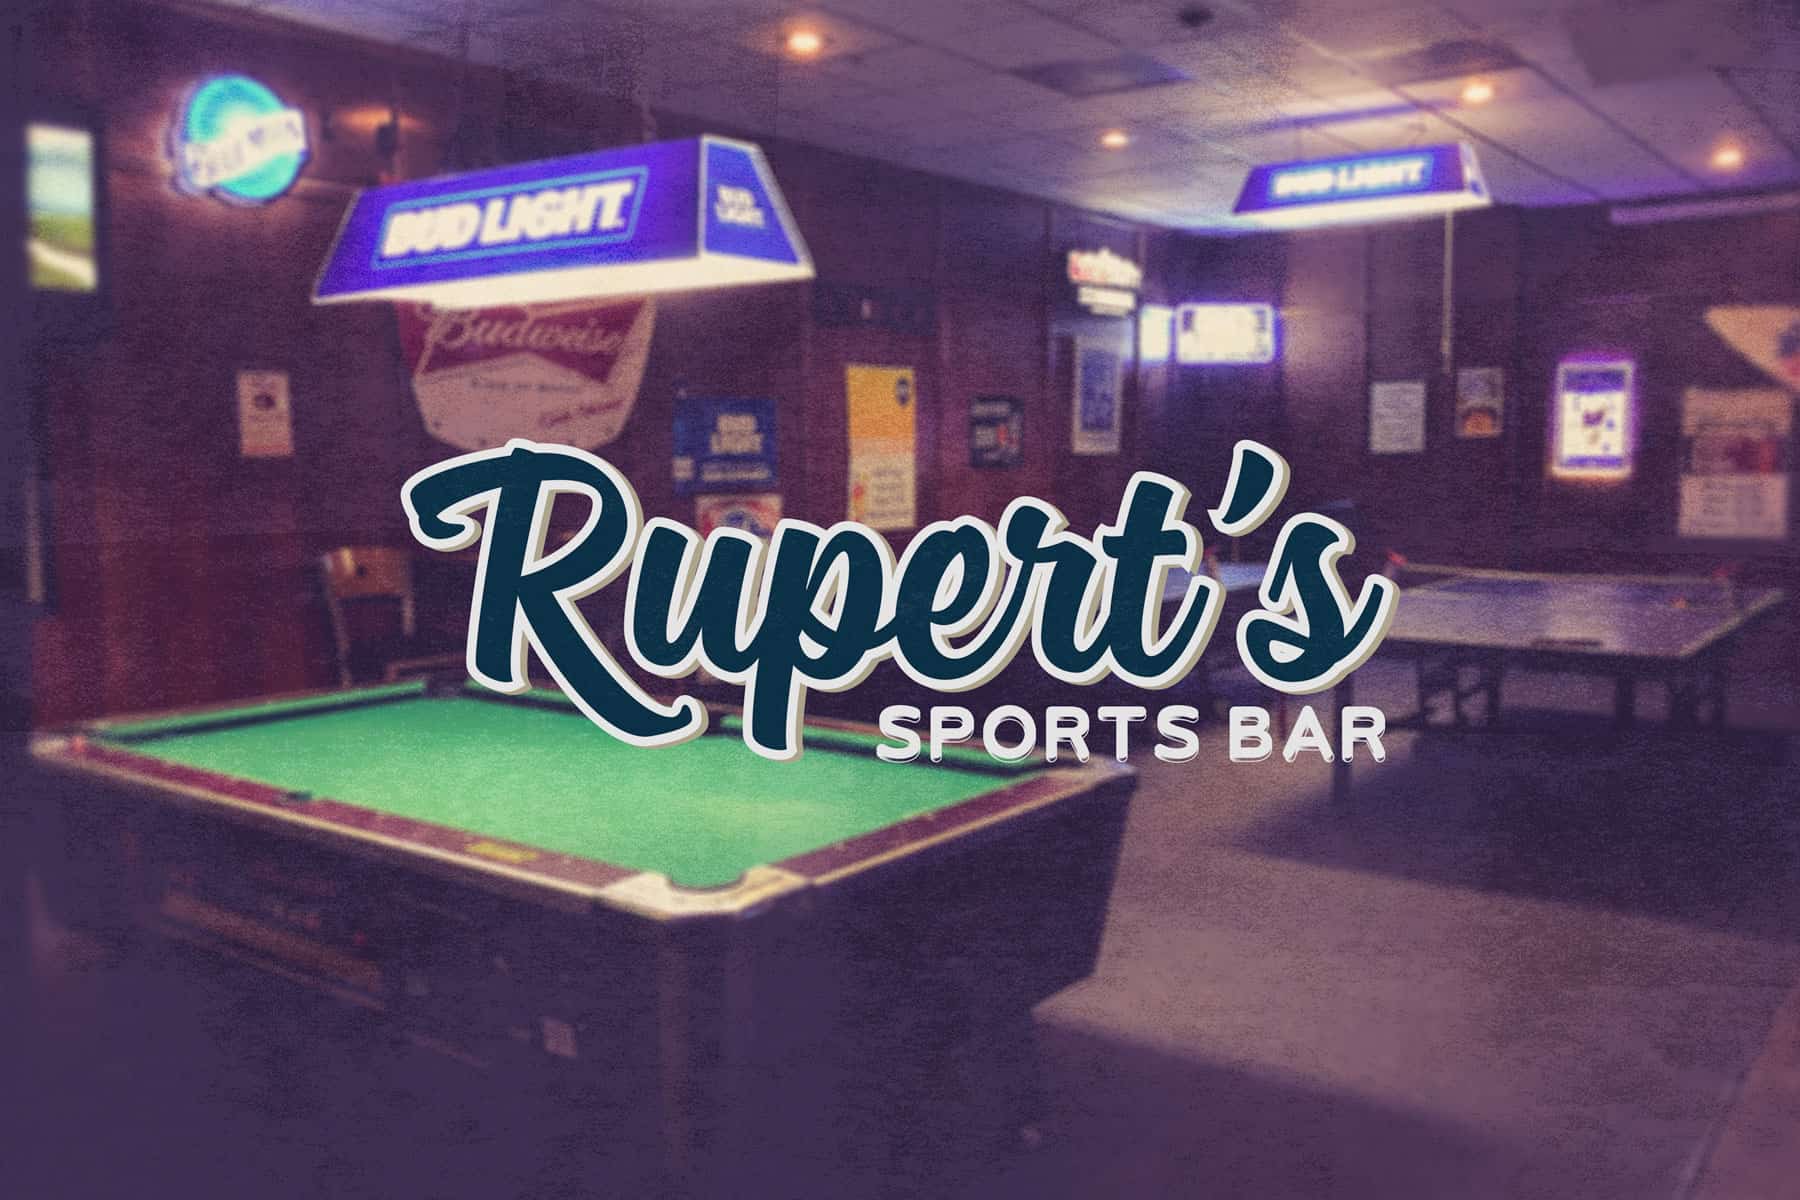 Rupert's Sports Bar logo over a photo of the bar showing billiard and ping pong tables